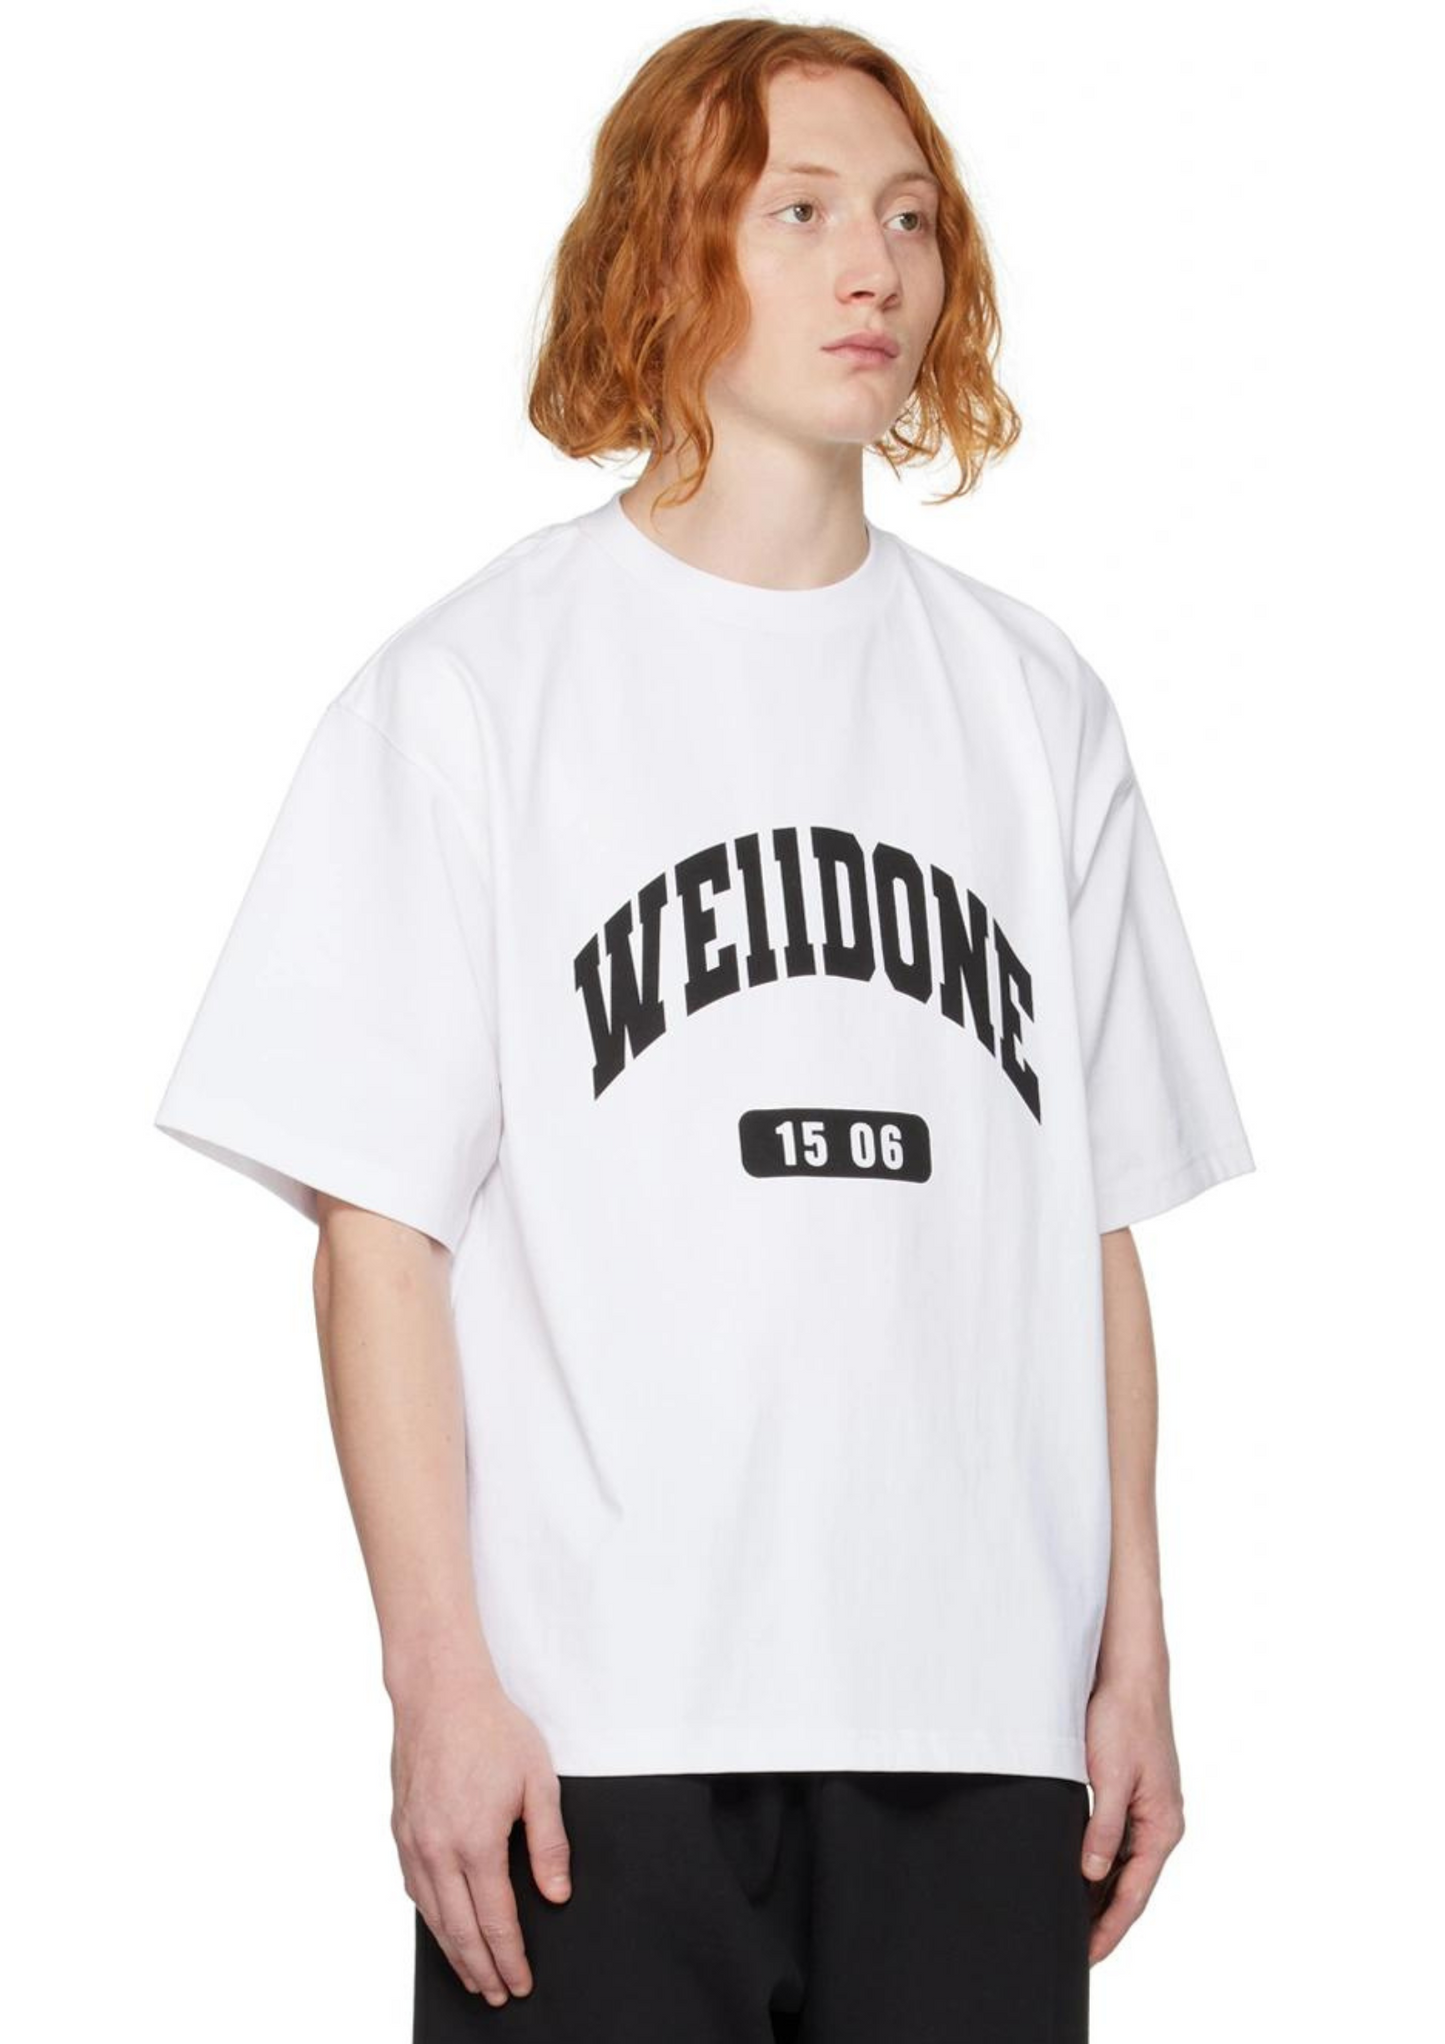 WE11DONE FW22 Printed T-Shirt (White)